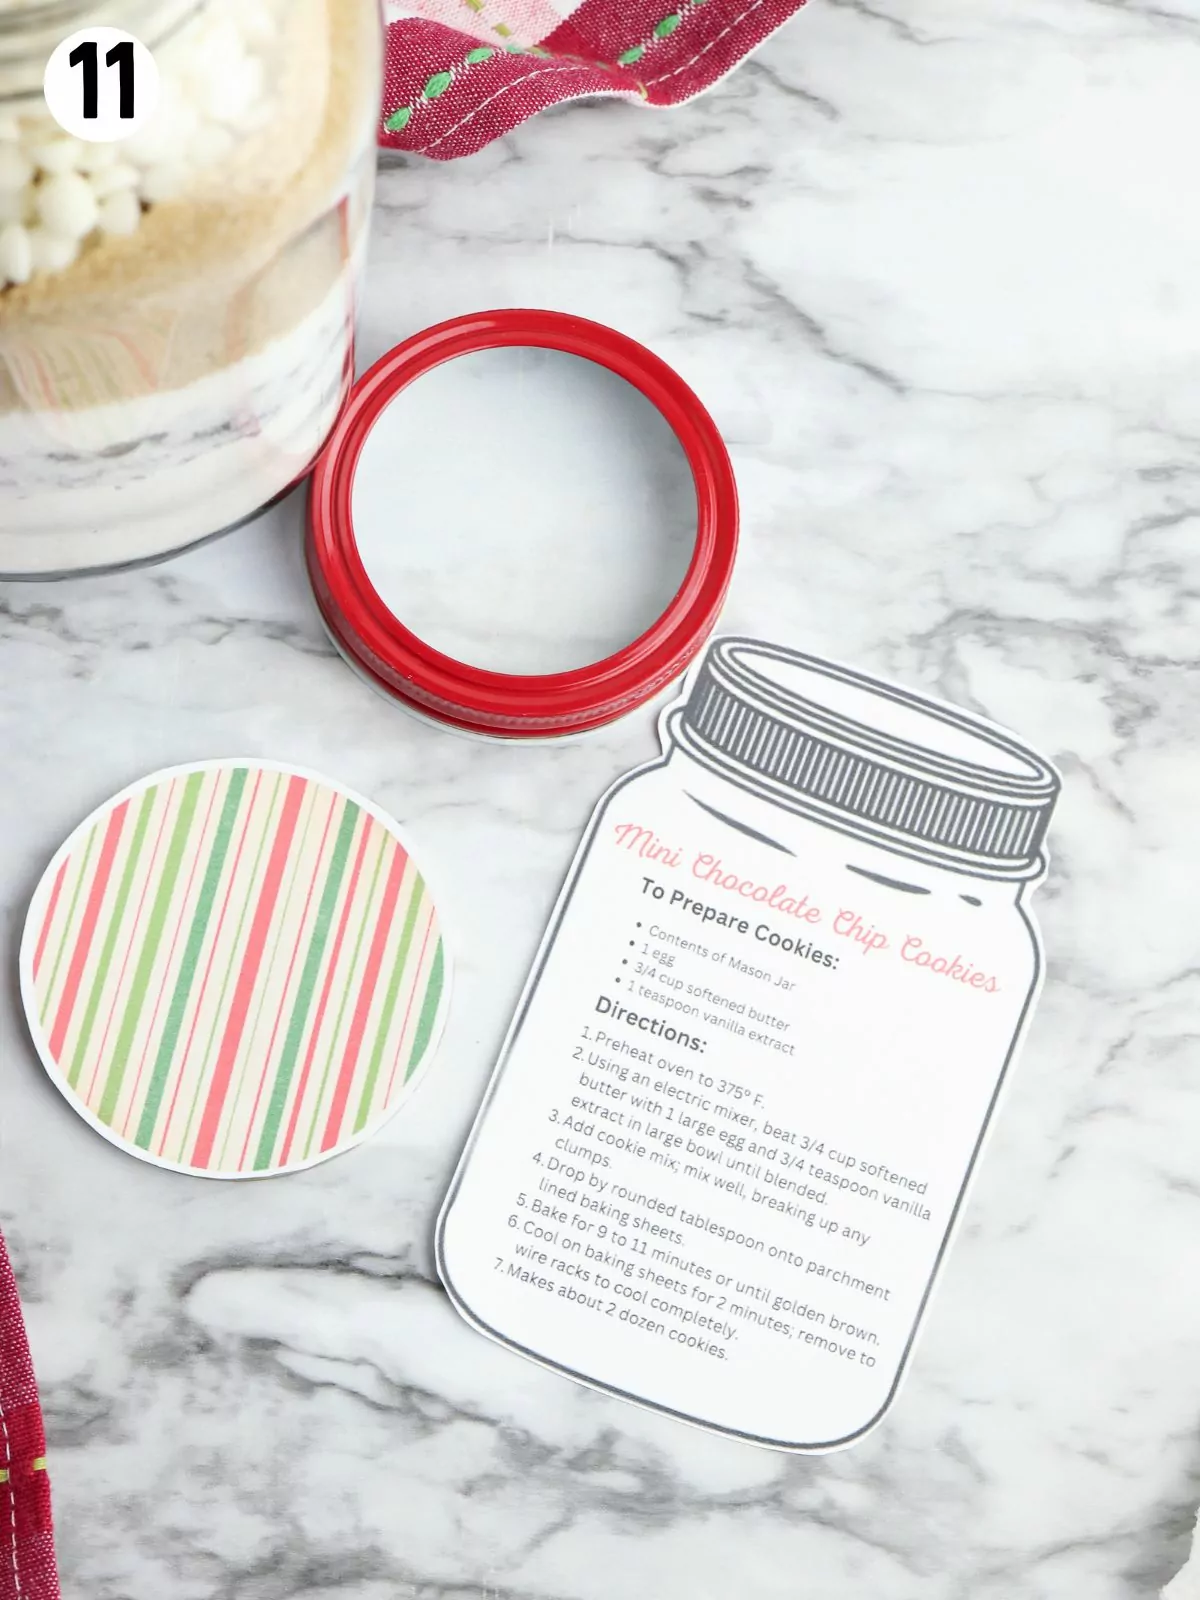 gifts in a jar recipes with printable tags.